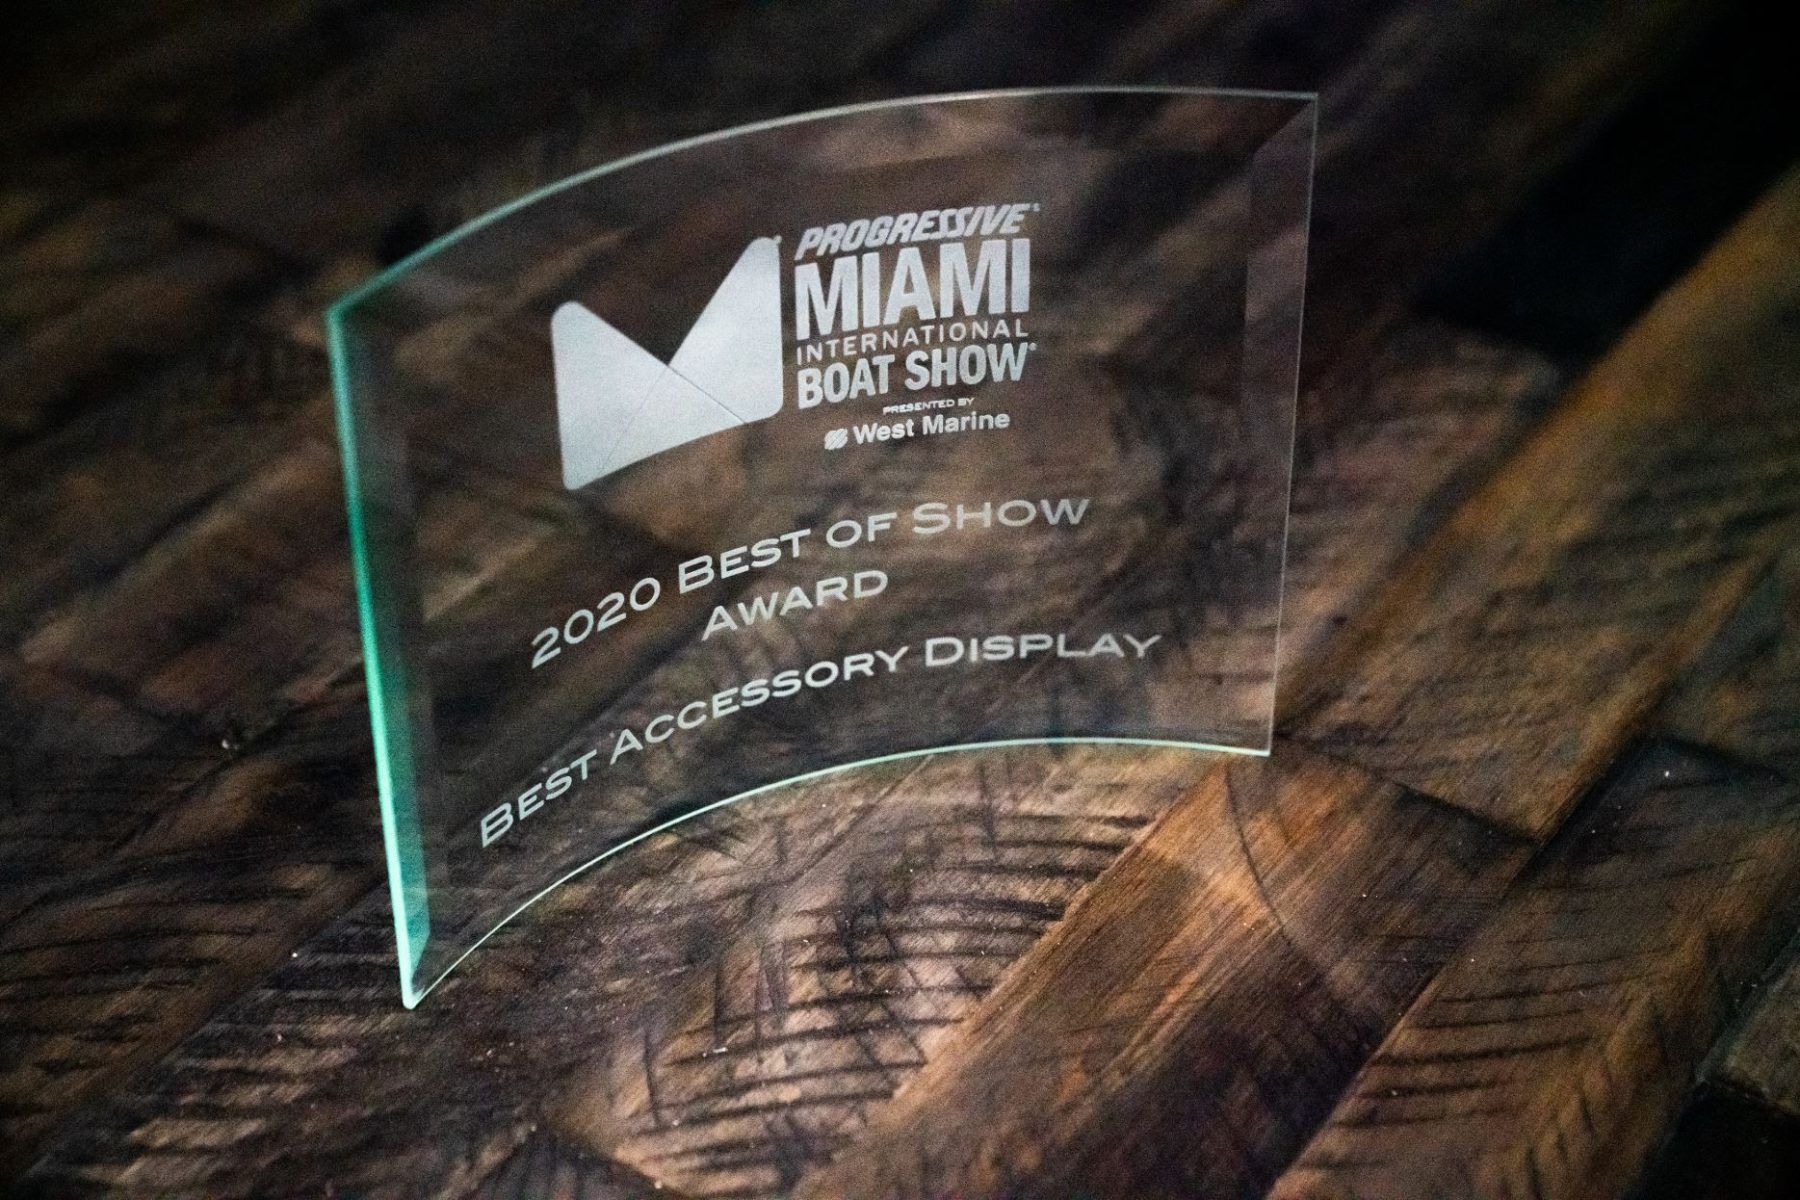 2020 Best of Show award for Best Accessory Display